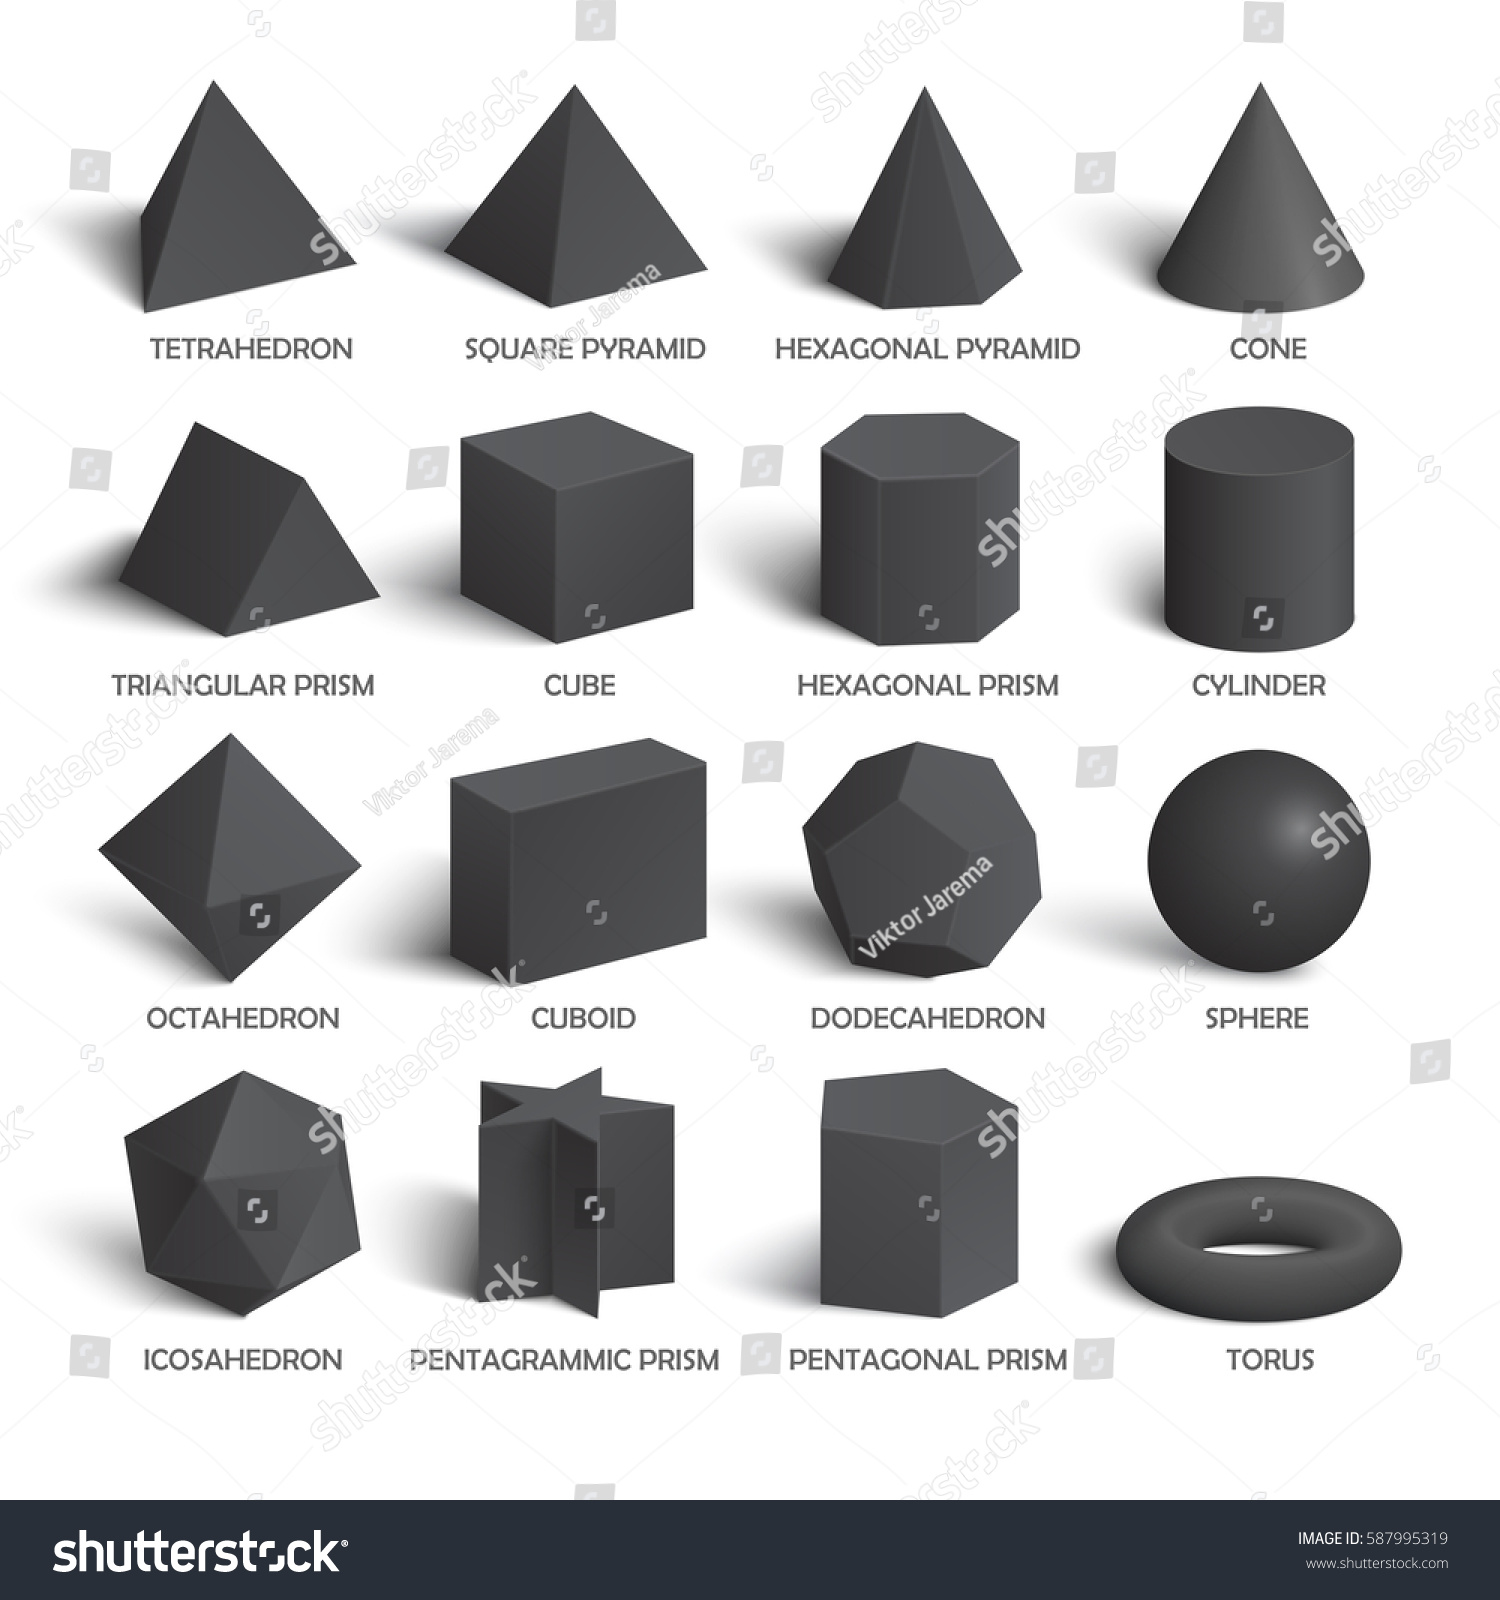 All basic 3d shapes template in dark. Realistic with shadow. Perfect for school, study, designers #587995319